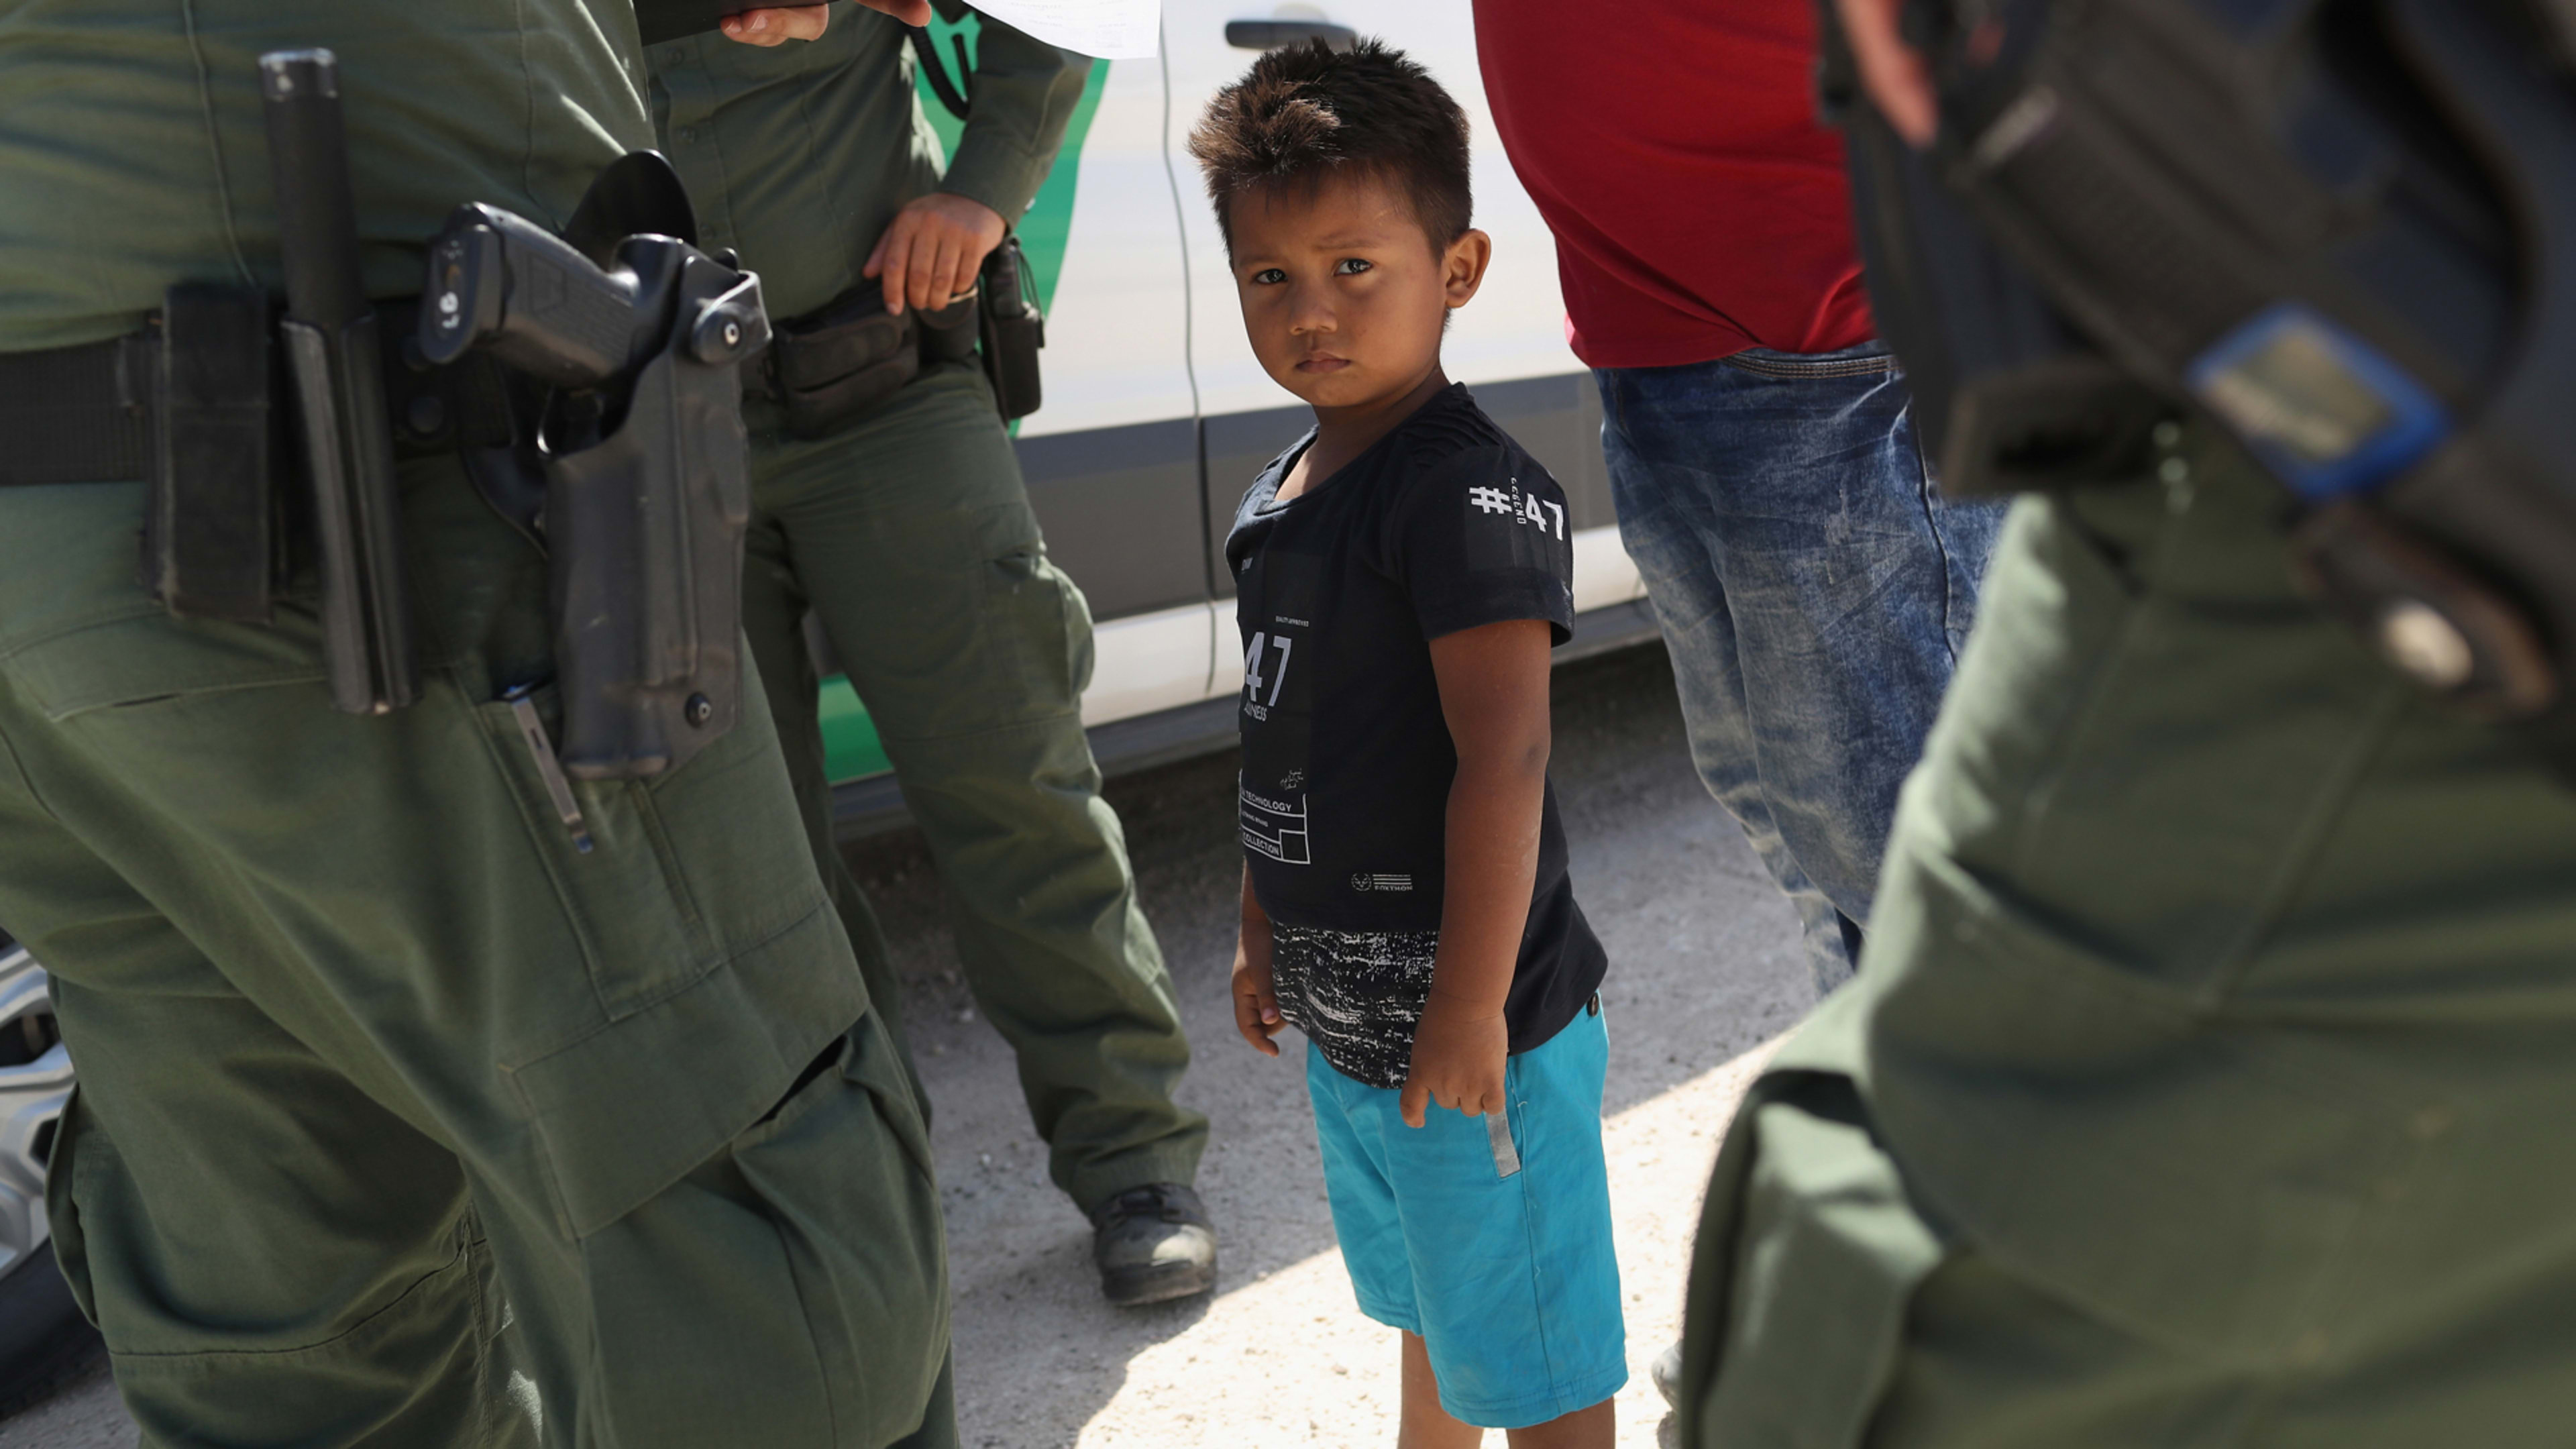 This Facebook fundraiser to help separated immigrant families is bringing in $4K a minute